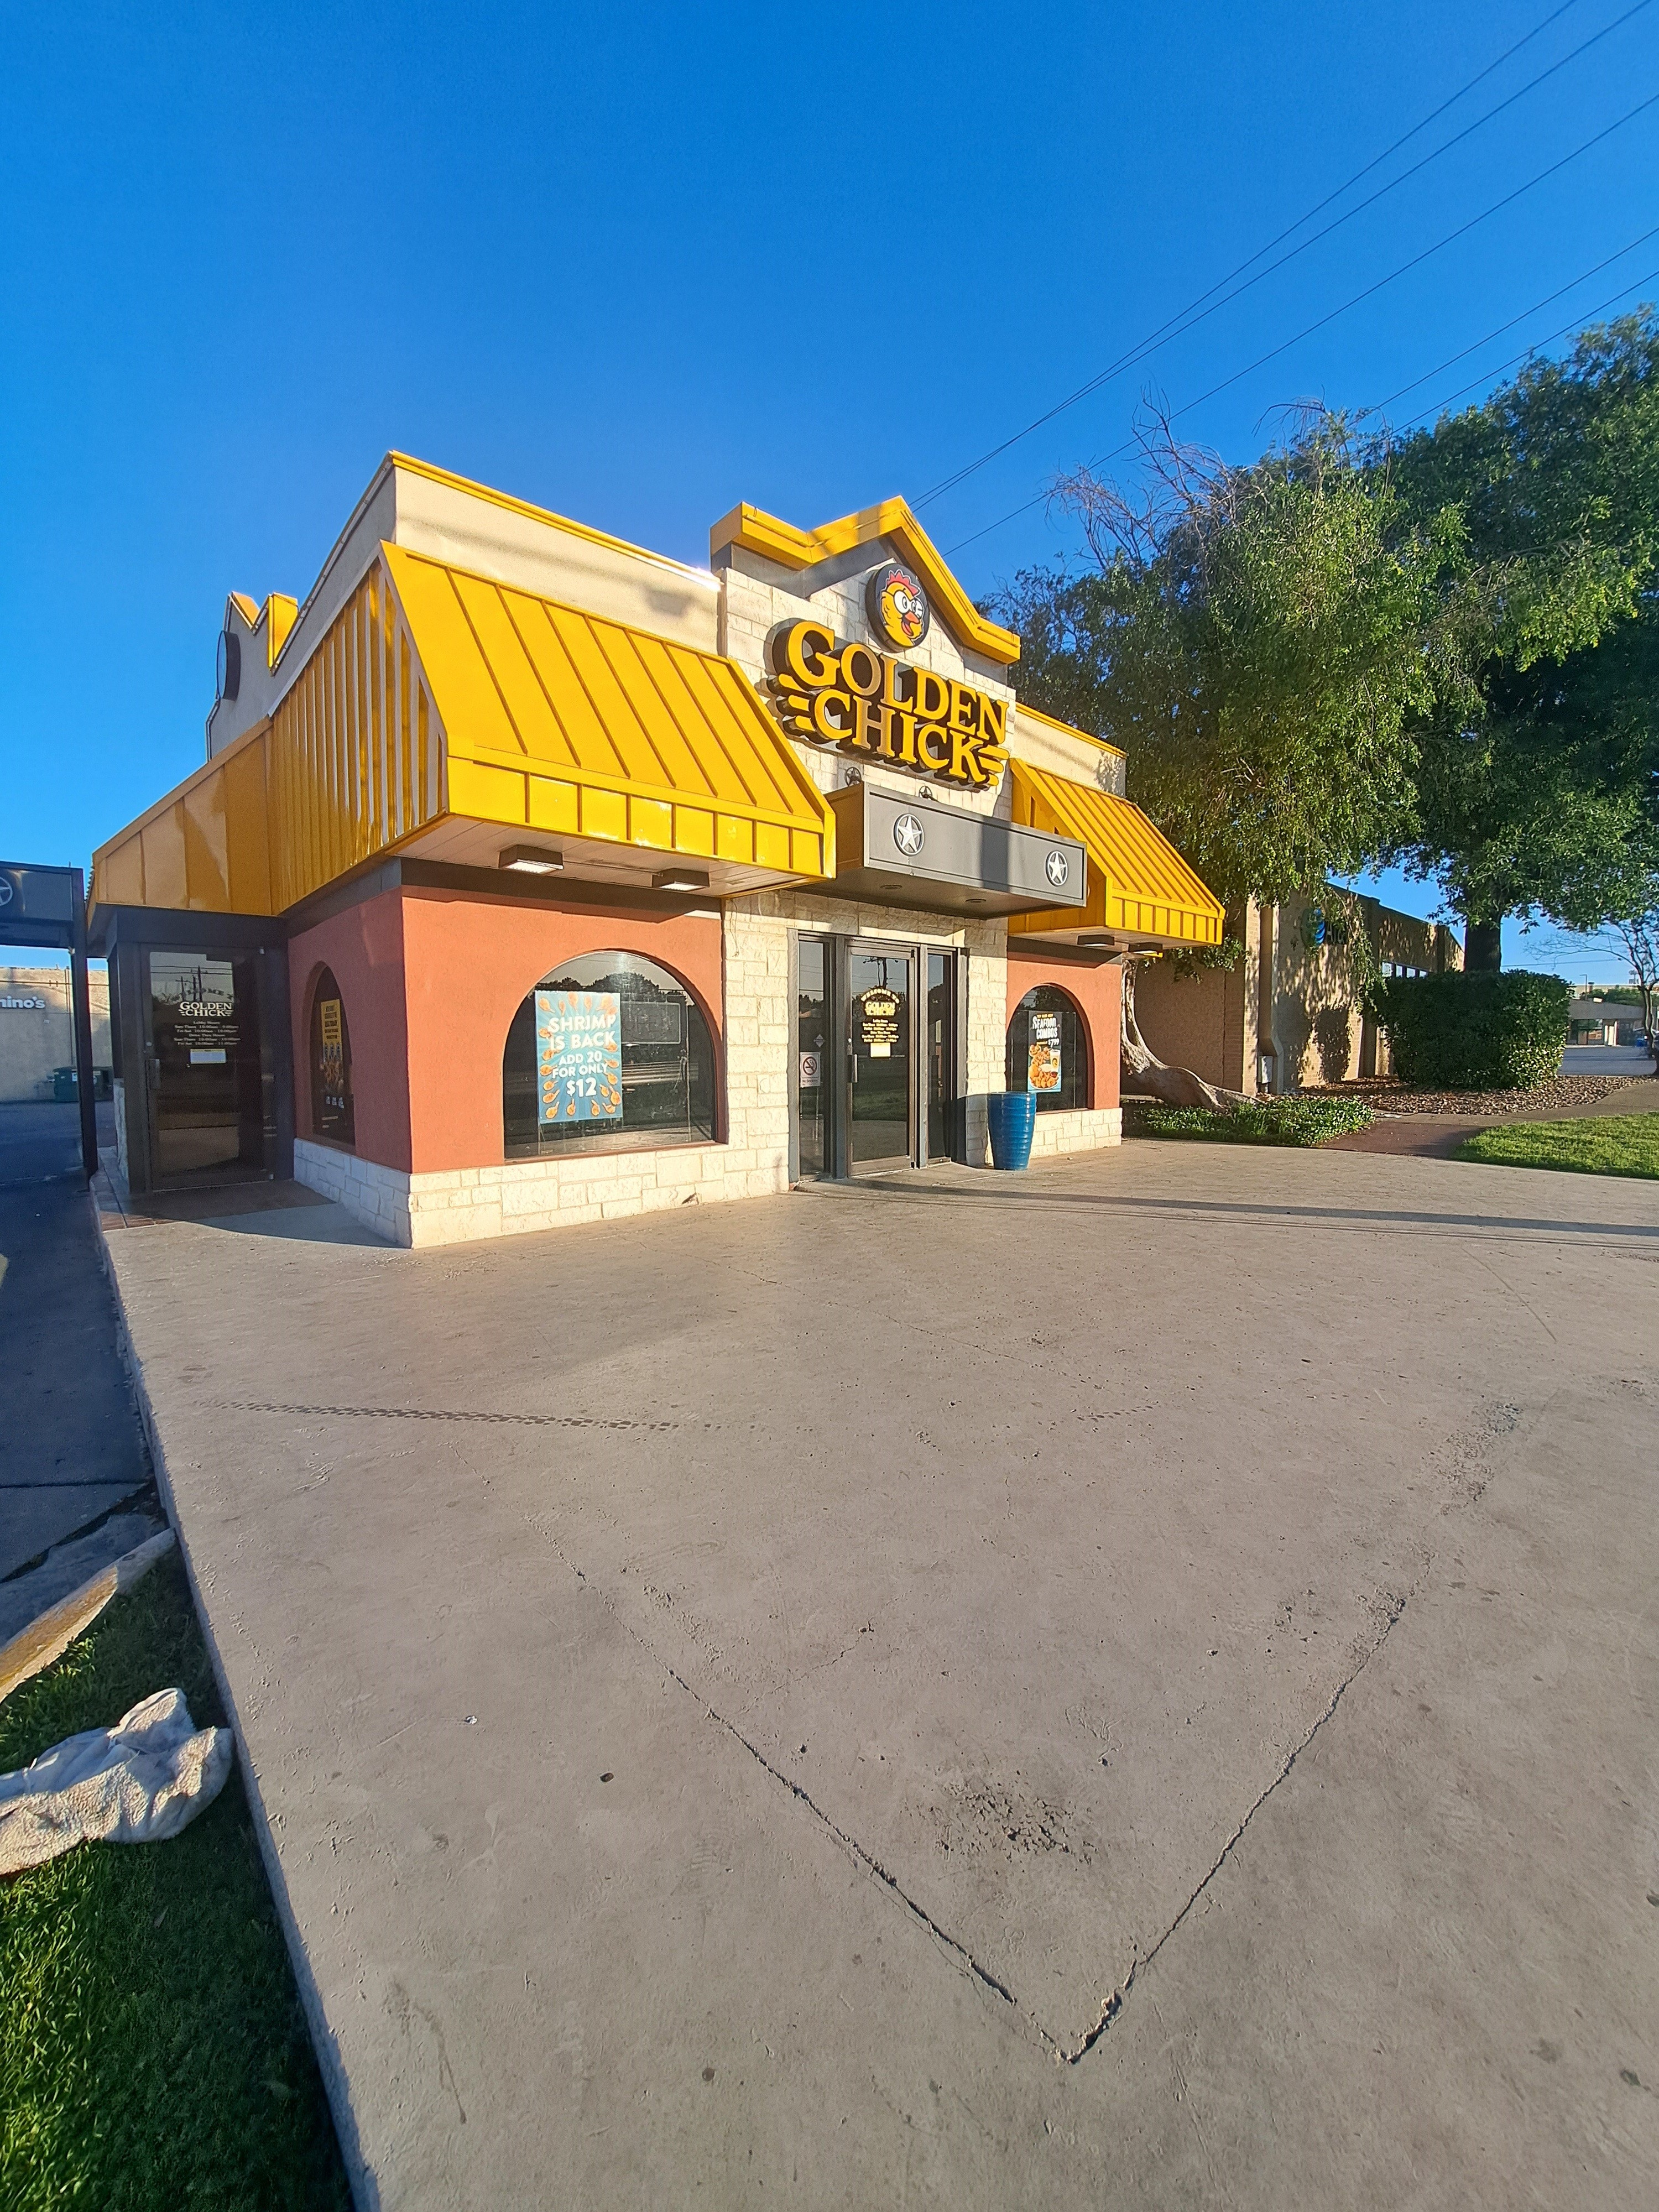 Golden Chick storefront.  Your local Golden Chick fast food restaurant in Austin, Texas